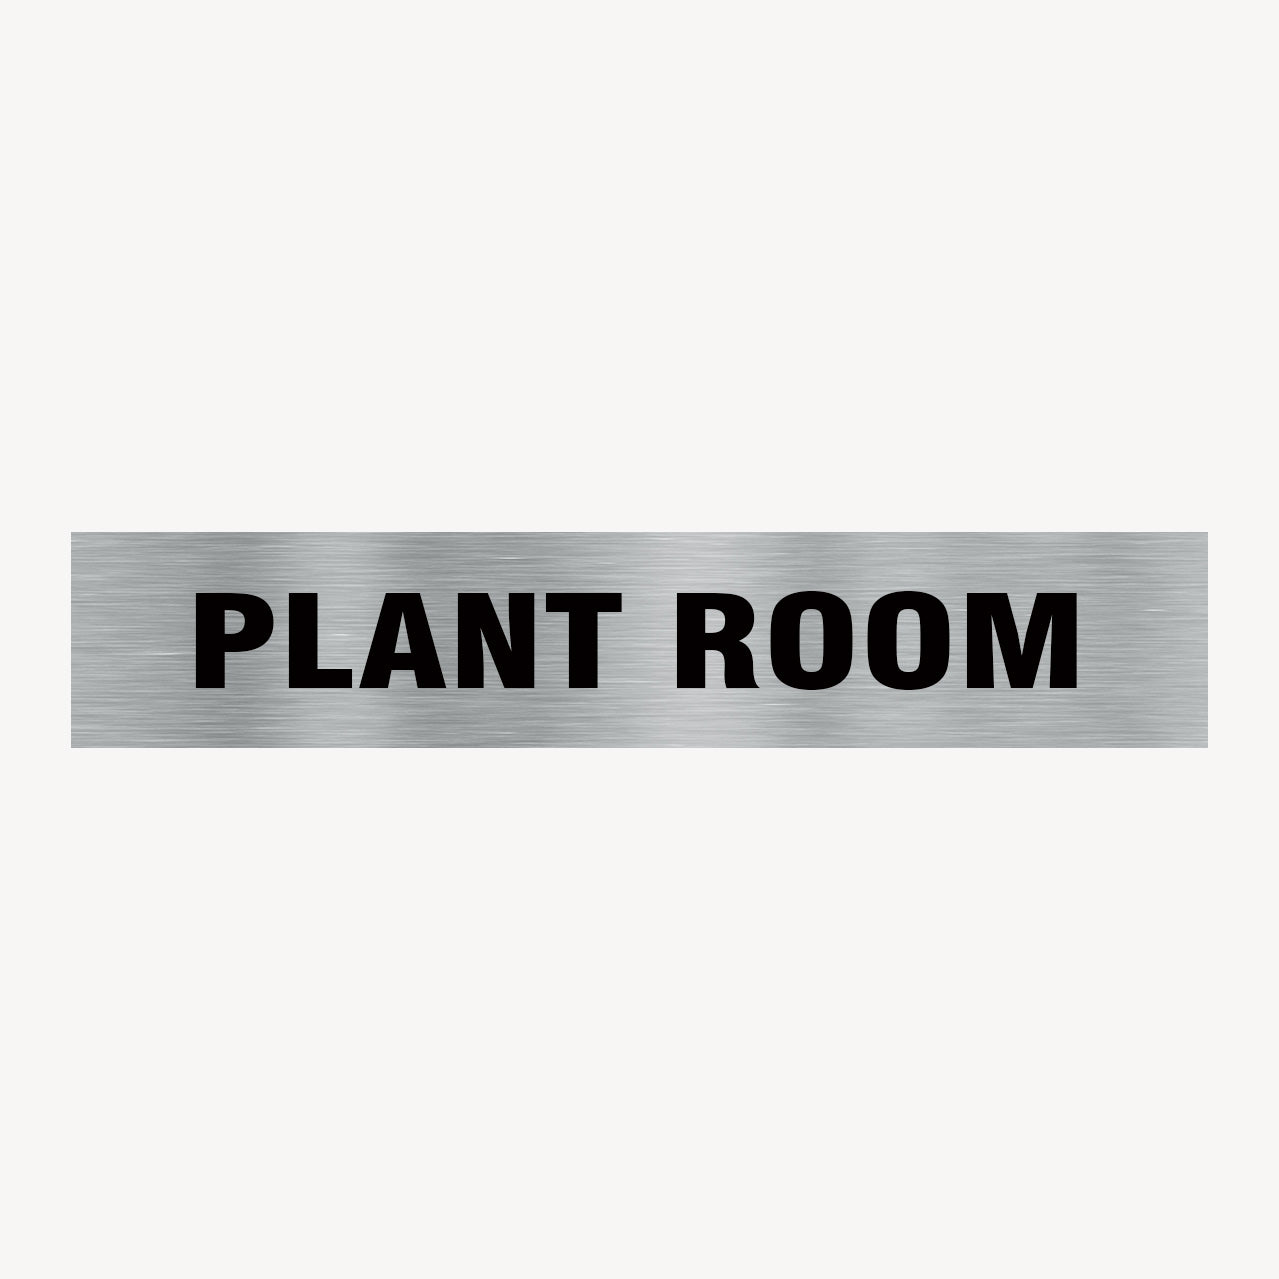 PLANT ROOM SIGN